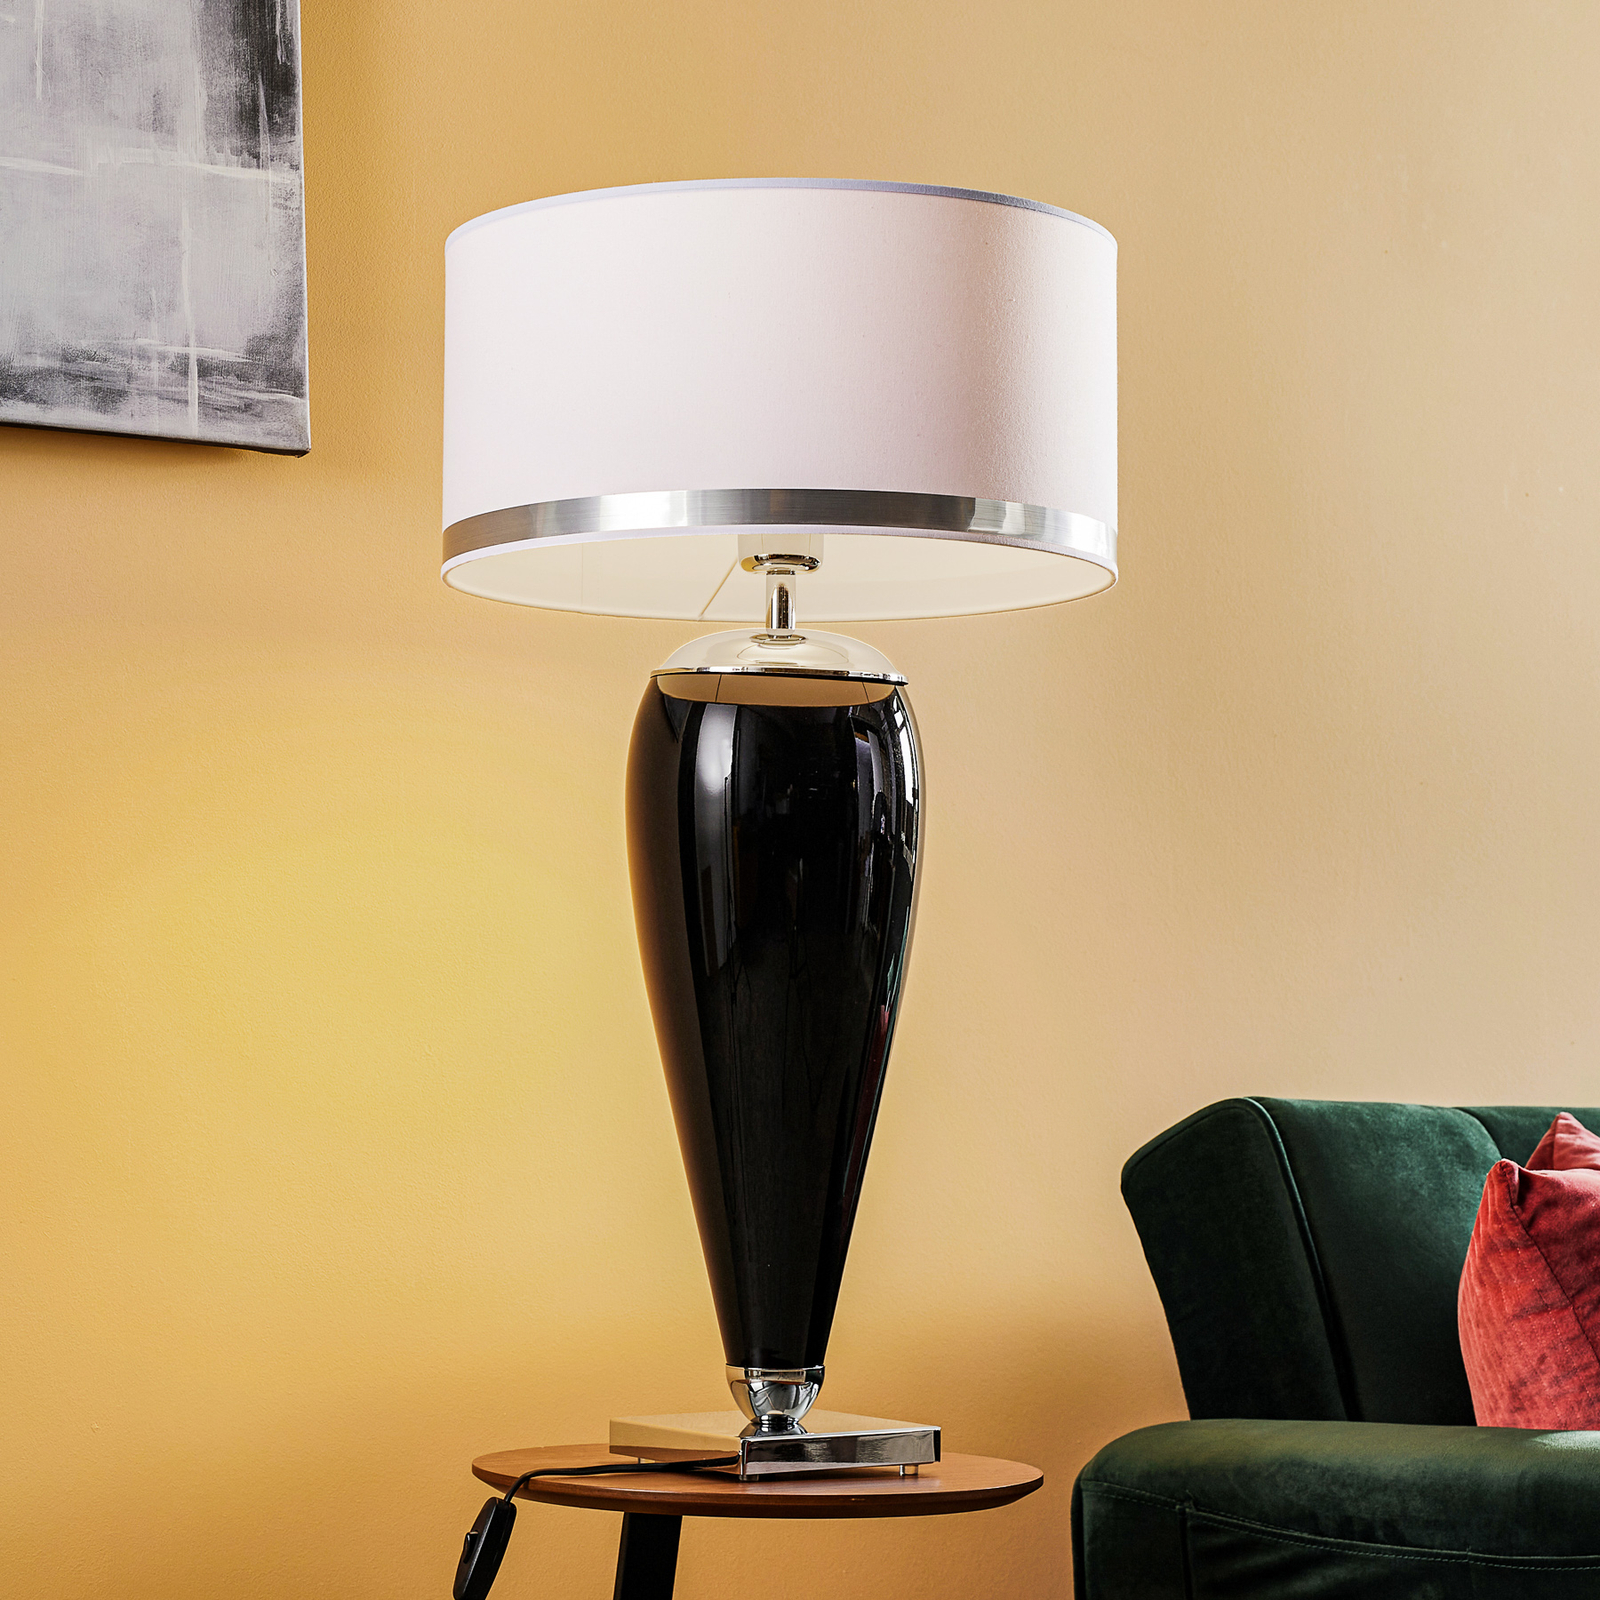 Lund table lamp in white and black, height 70 cm